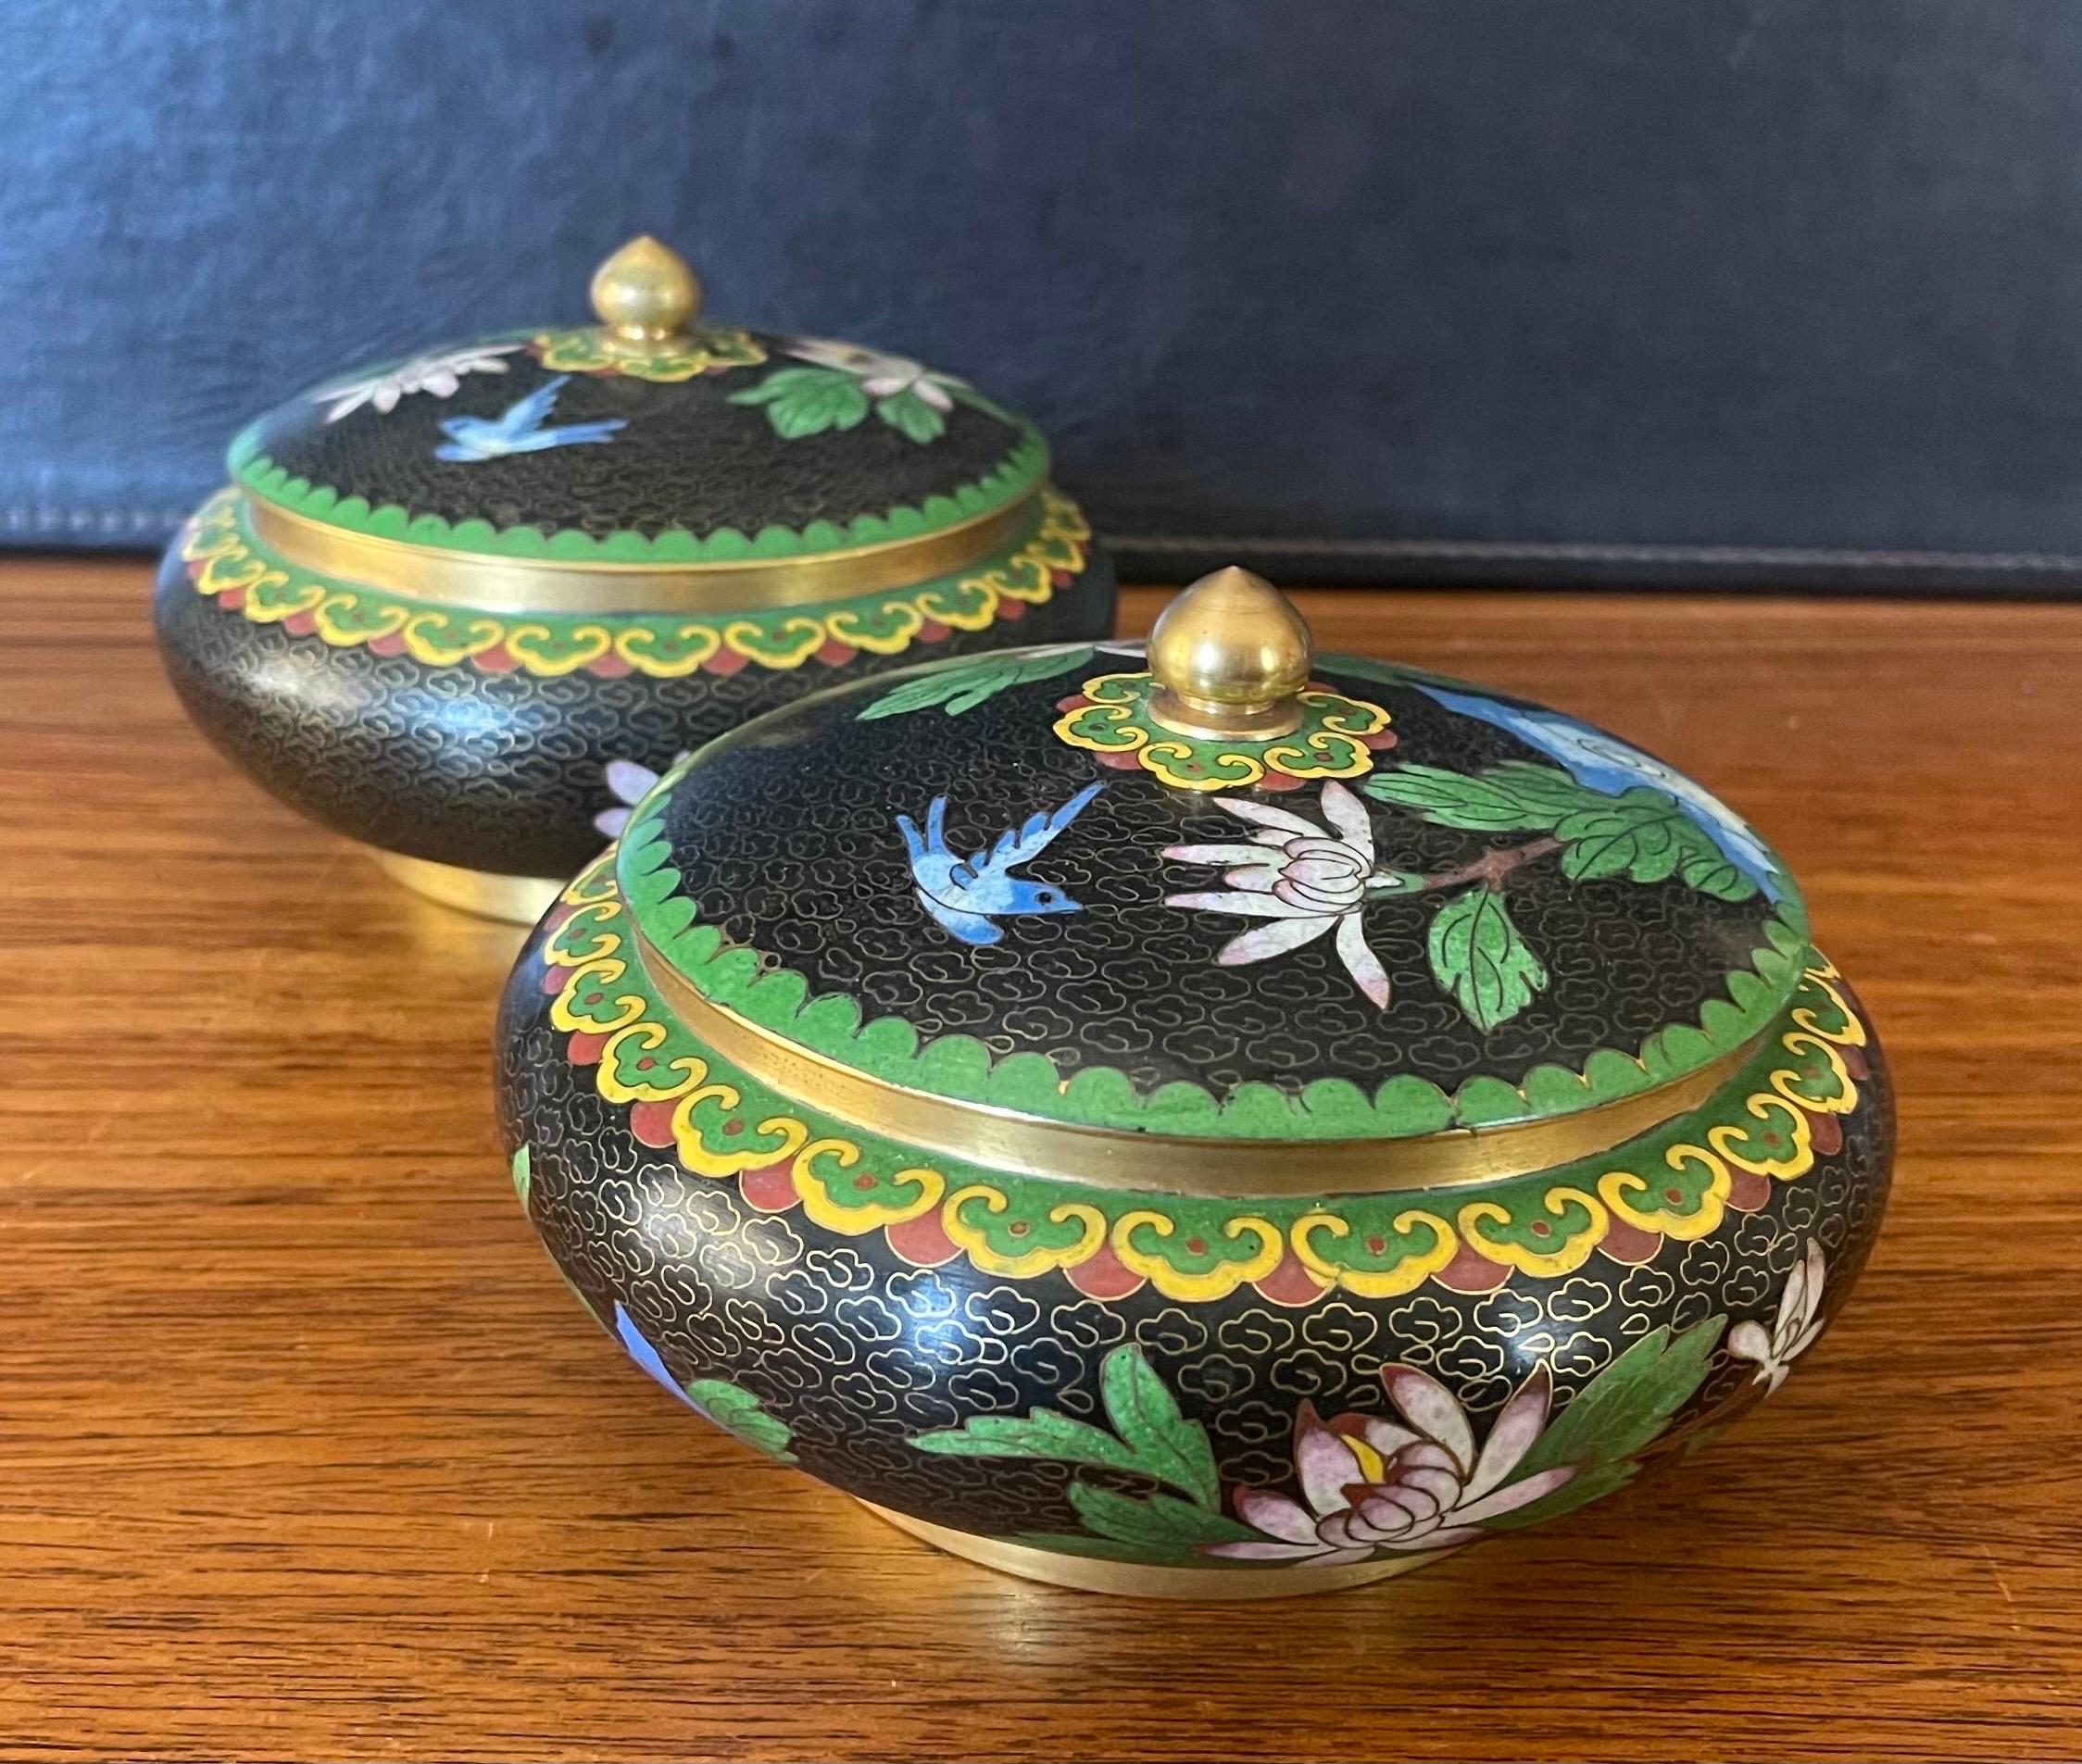 A nice mirrored pair of Chinese cloisonne lidded bowls with floral motif, circa 1950s. The bowls are in very good condition with no dings or dents and measure 6.5